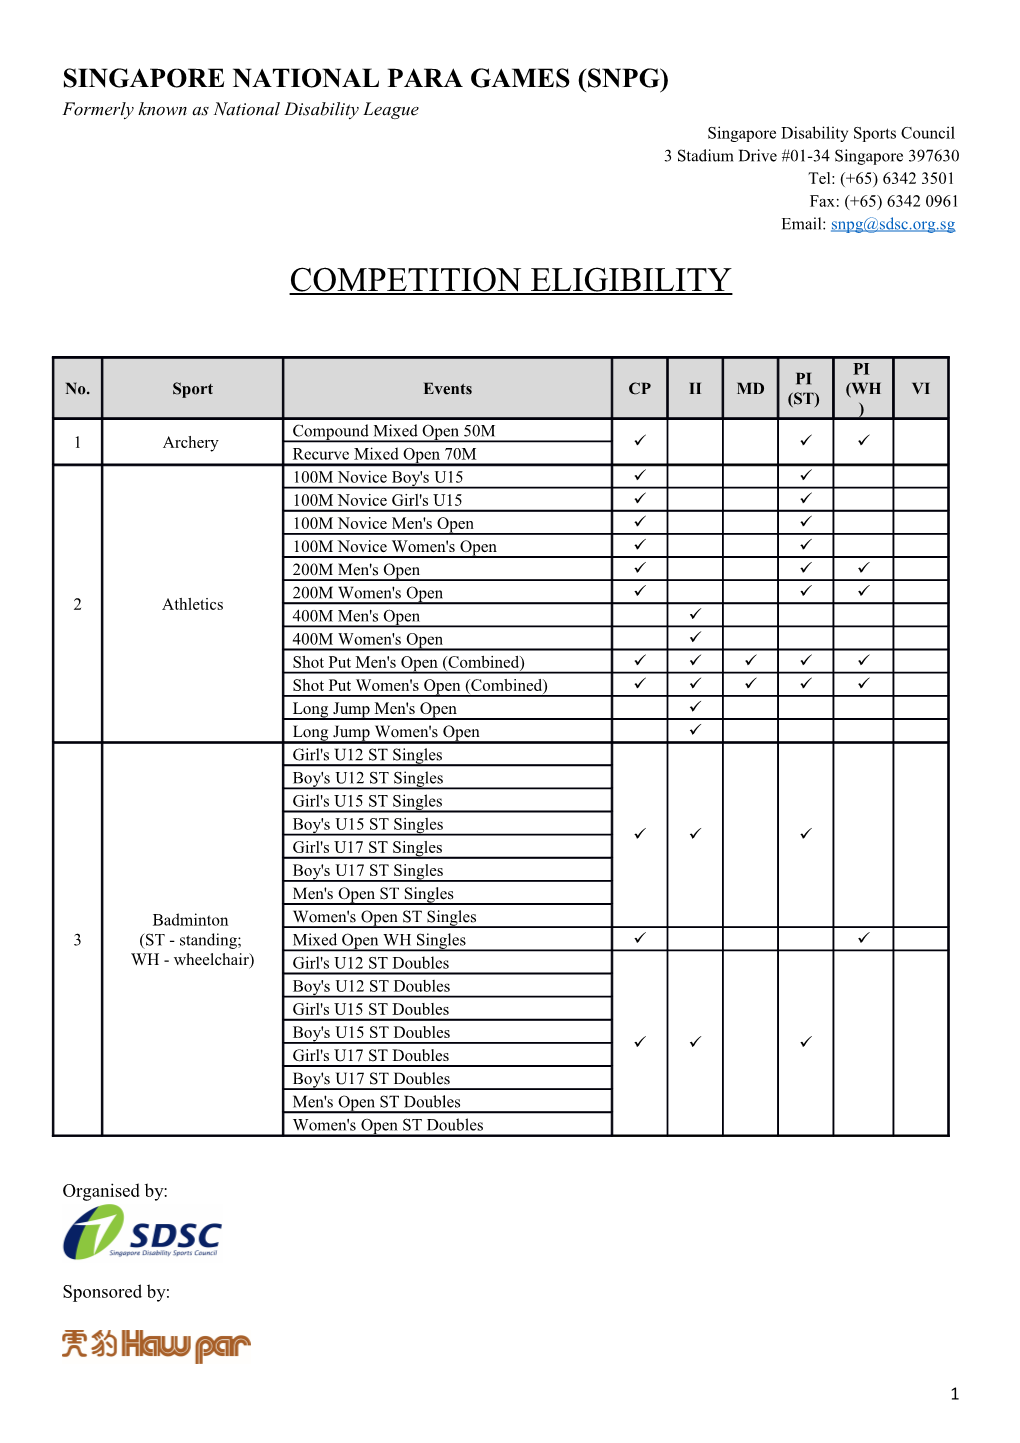 Competition Eligibility